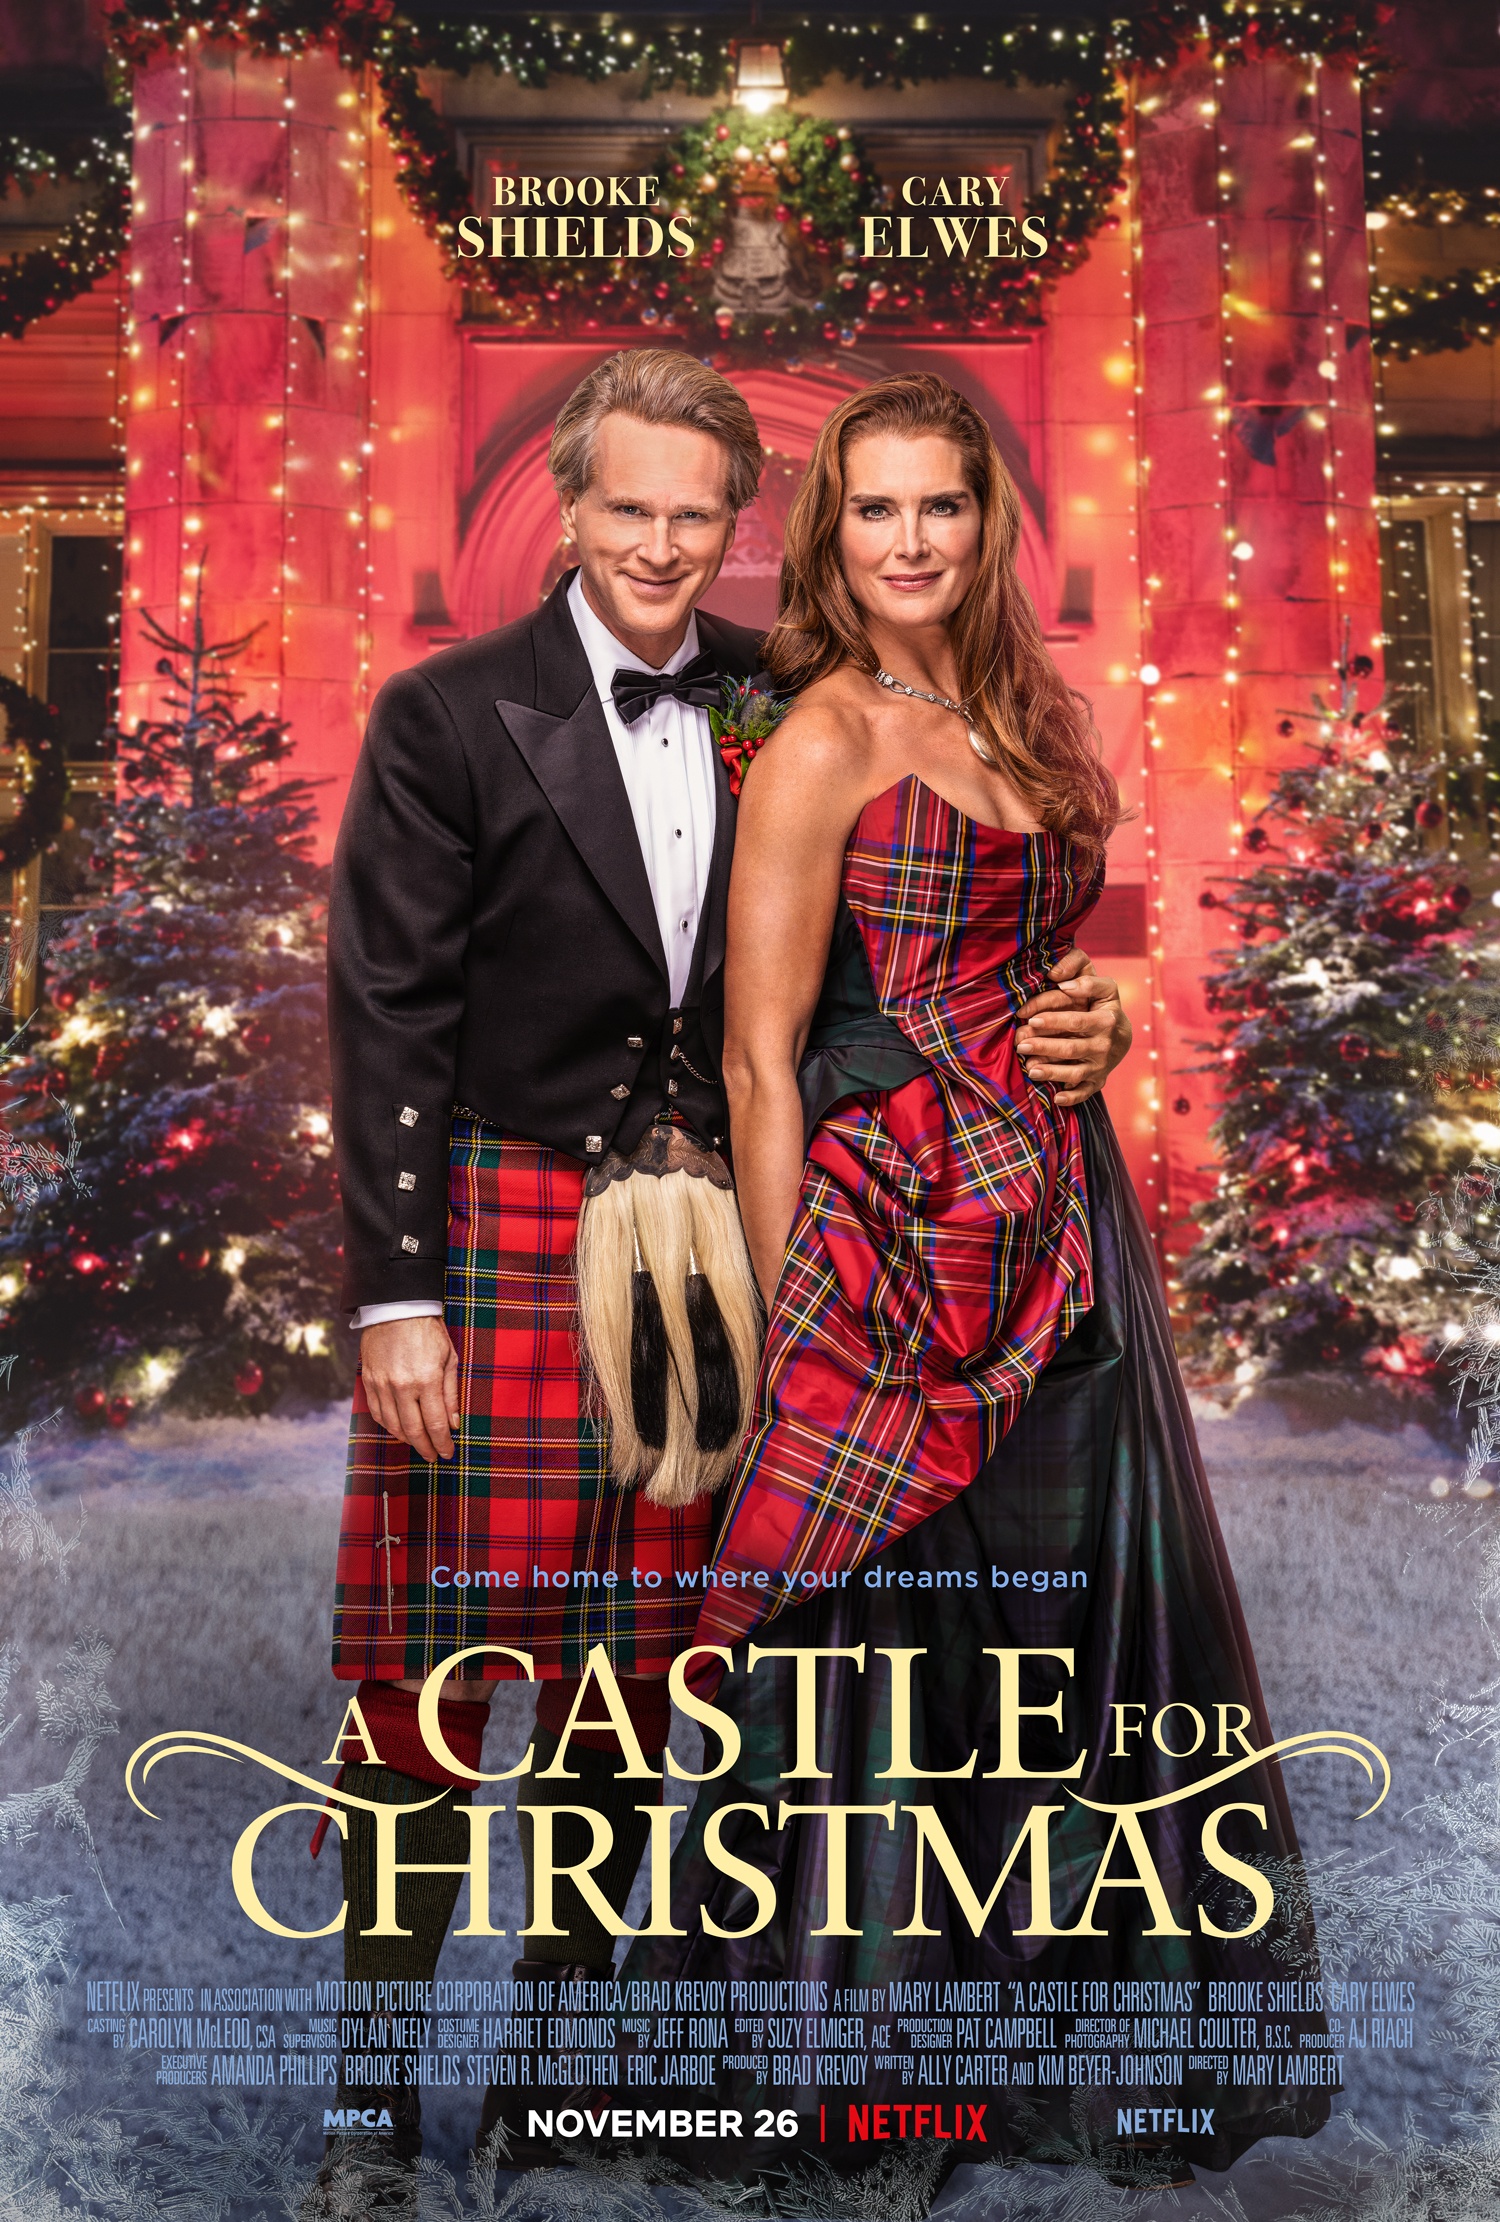 New Movie Netflixs A Castle For Christmas Starring Brooke Shields Cary Elwes - Talking With Tami